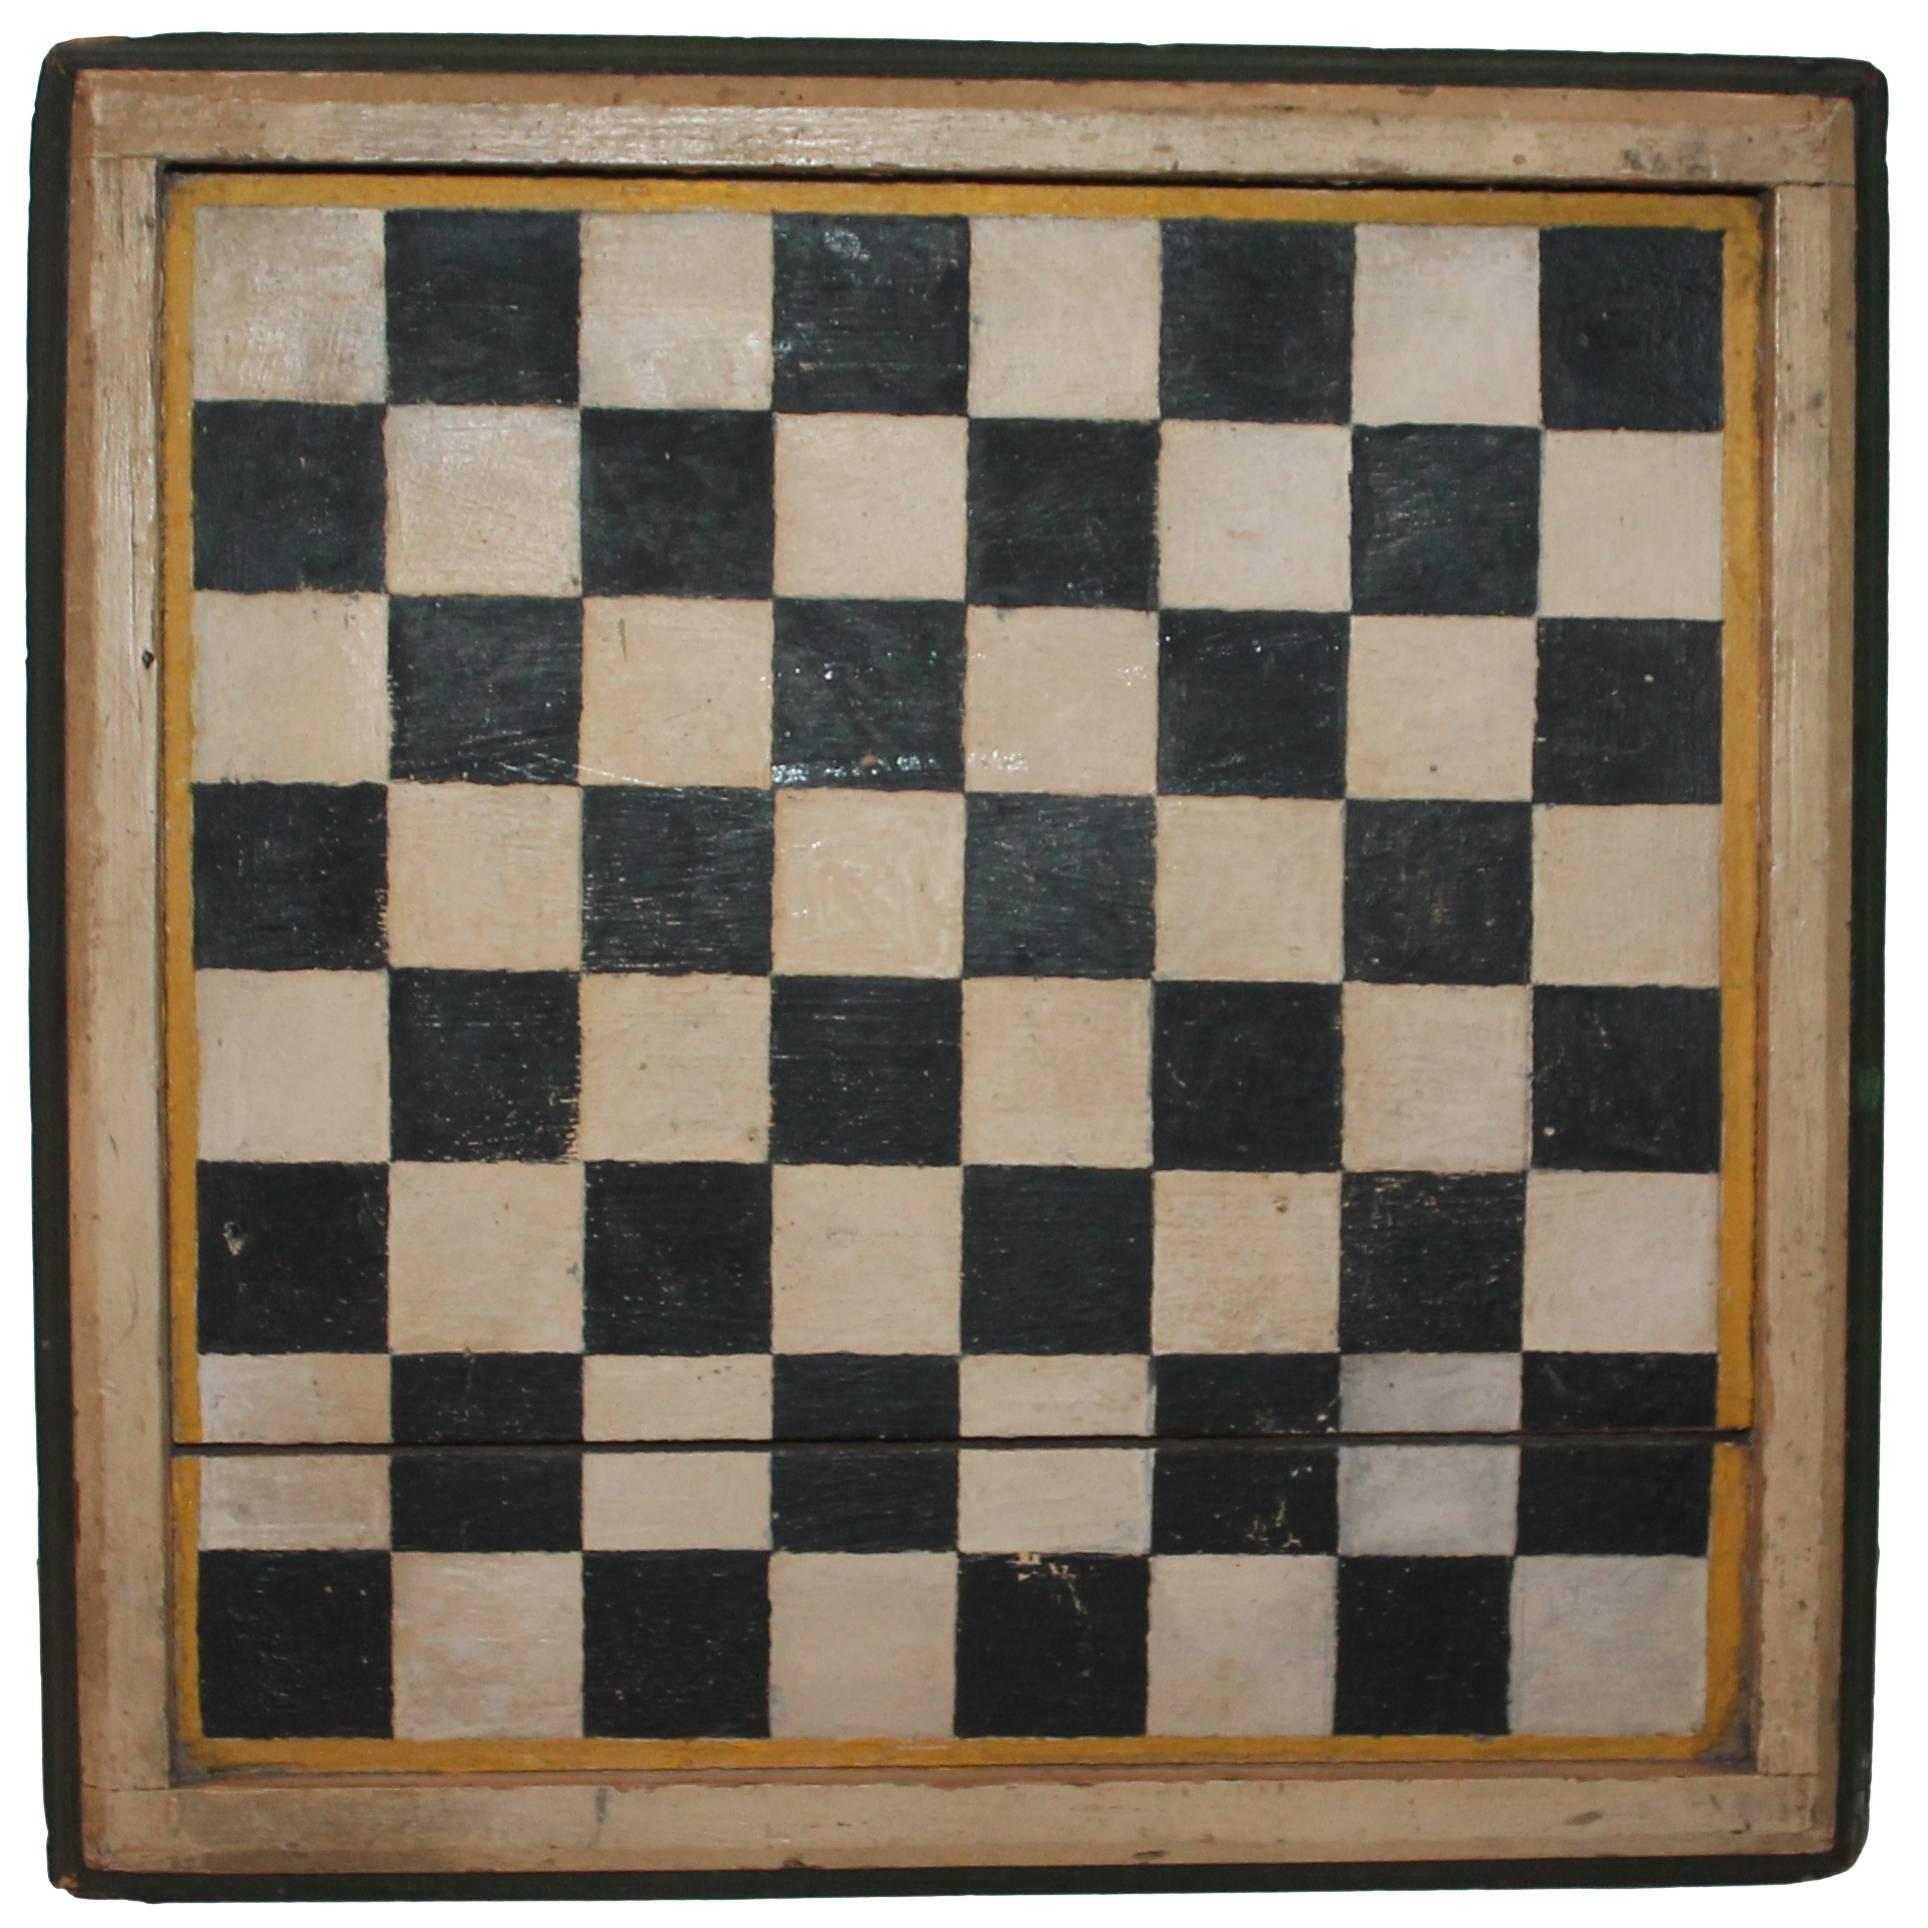 19th Century Original Painted Game Board from New England